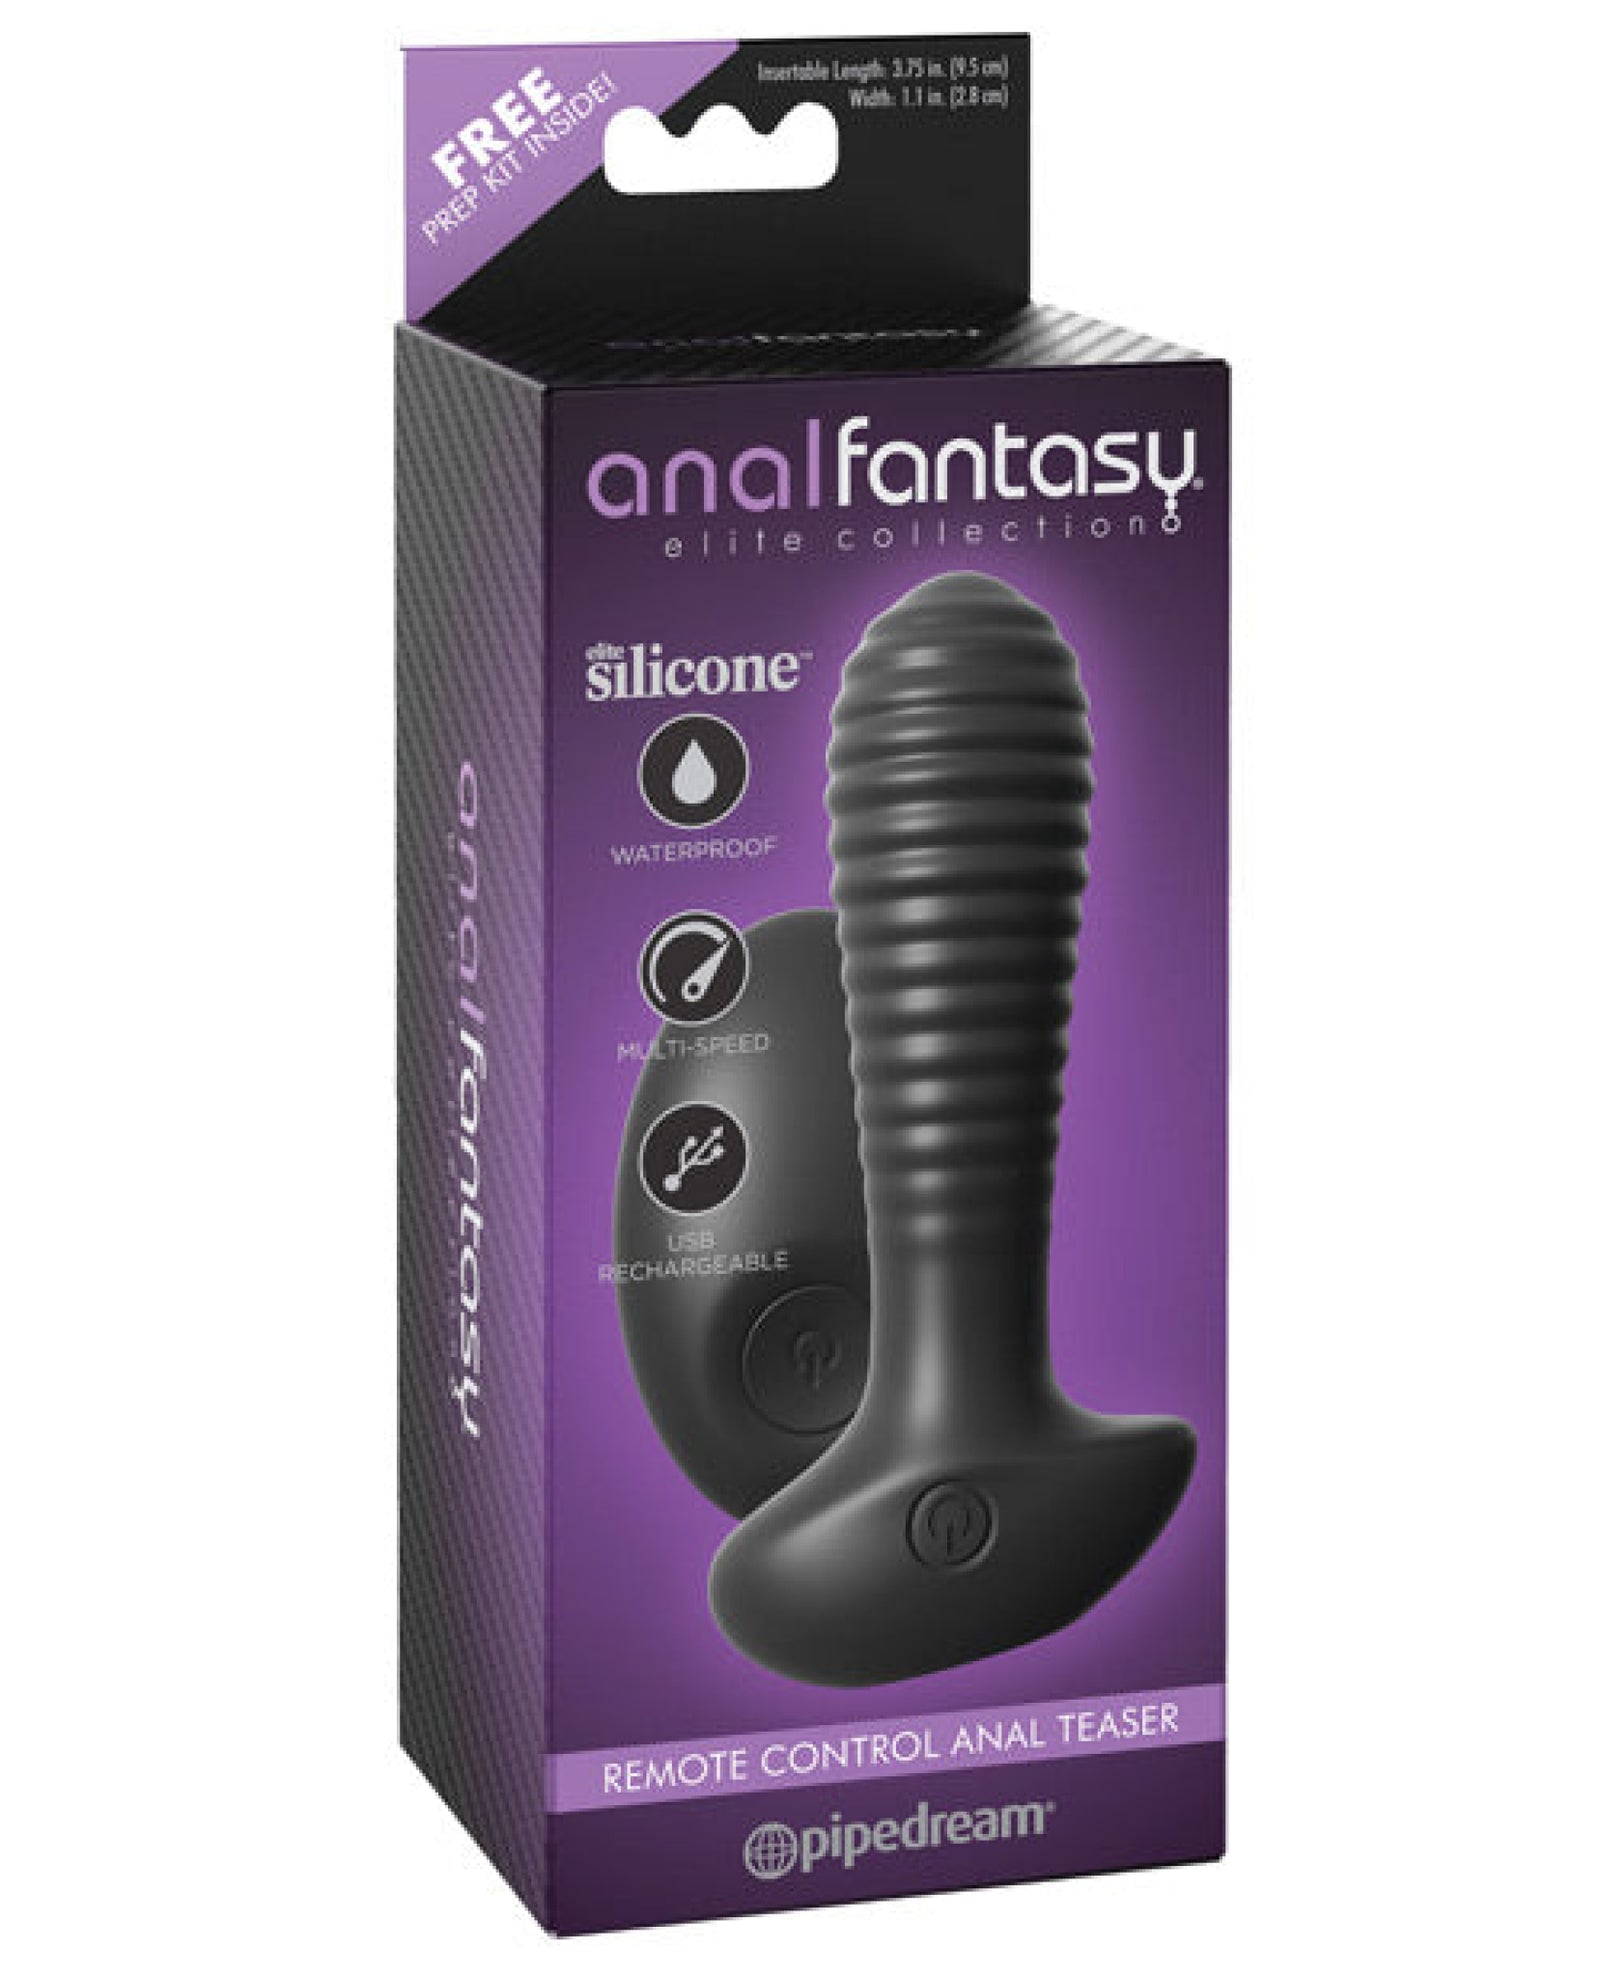 Anal Fantasy Elite Remote Control Anal Teaser Pipedream®